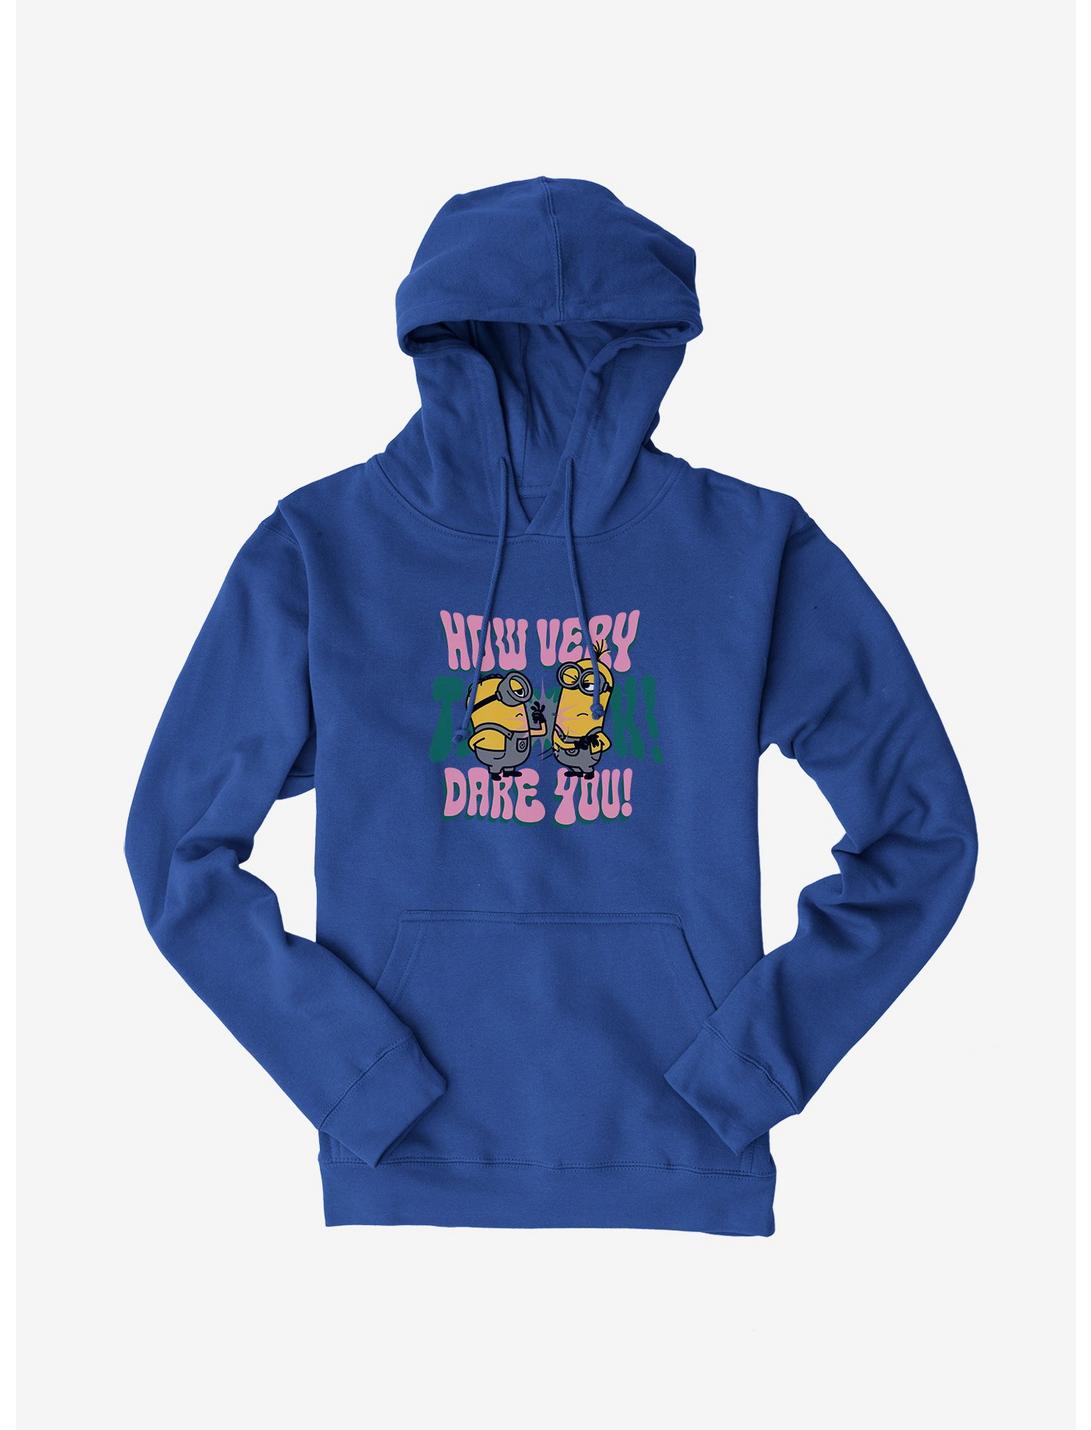 Minions Groovy How Dare You Hoodie, ROYAL BLUE, hi-res